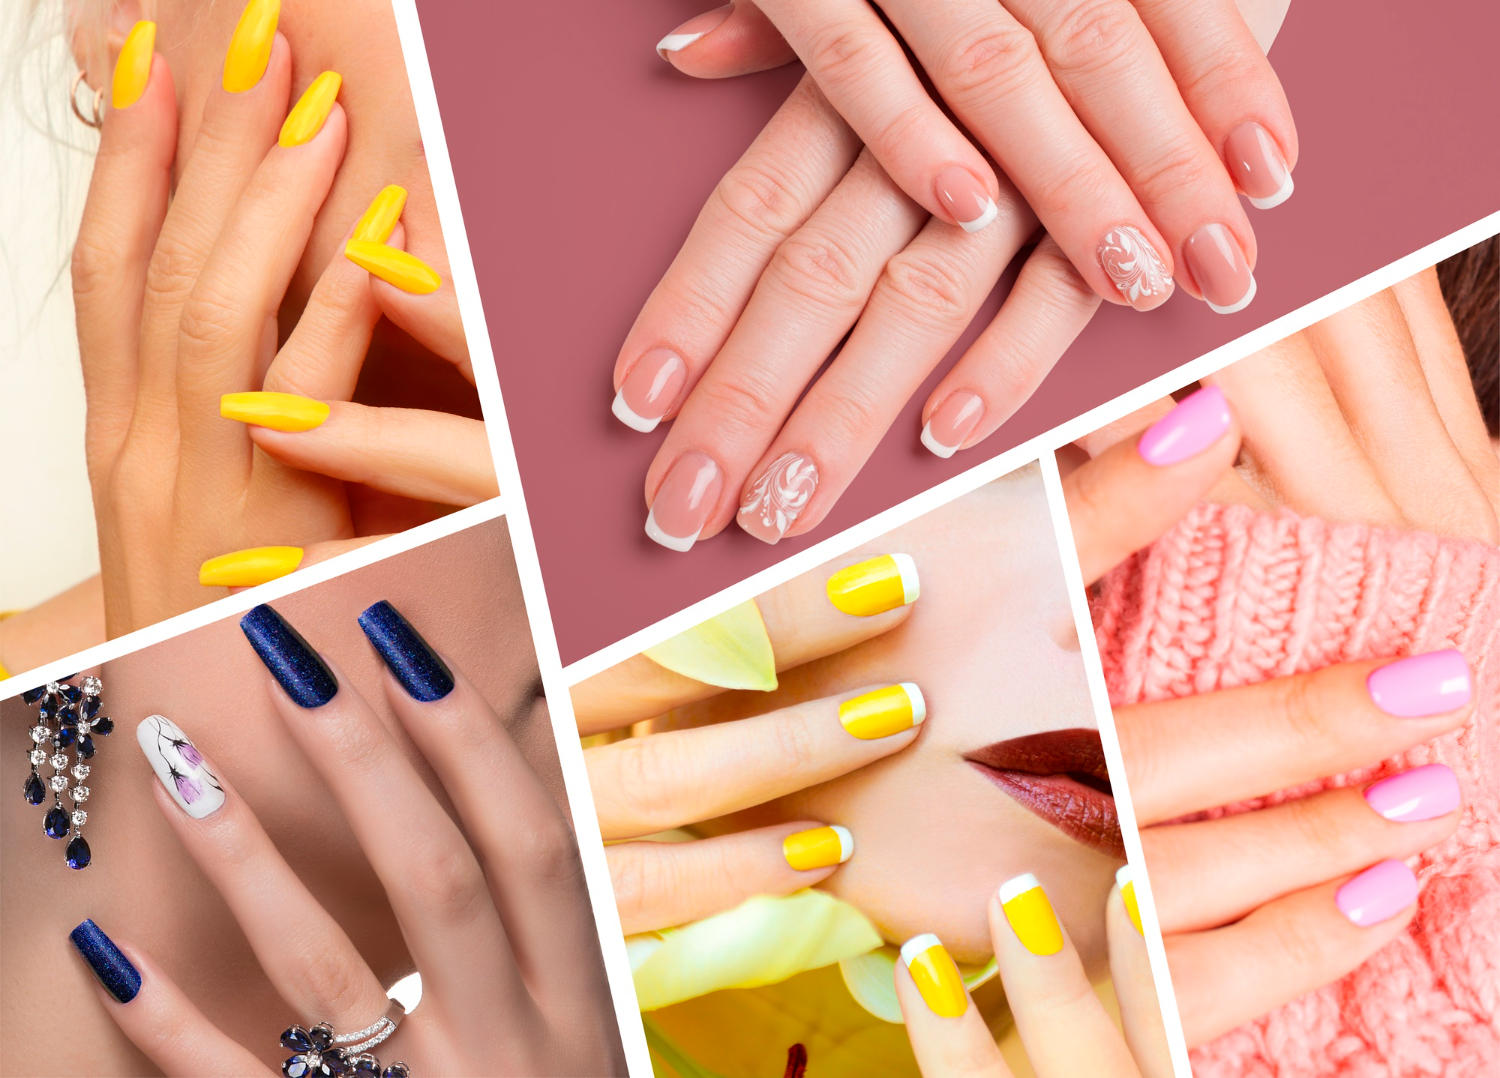 Nails Guelph Your Ultimate Guide to Salon Services and Trends